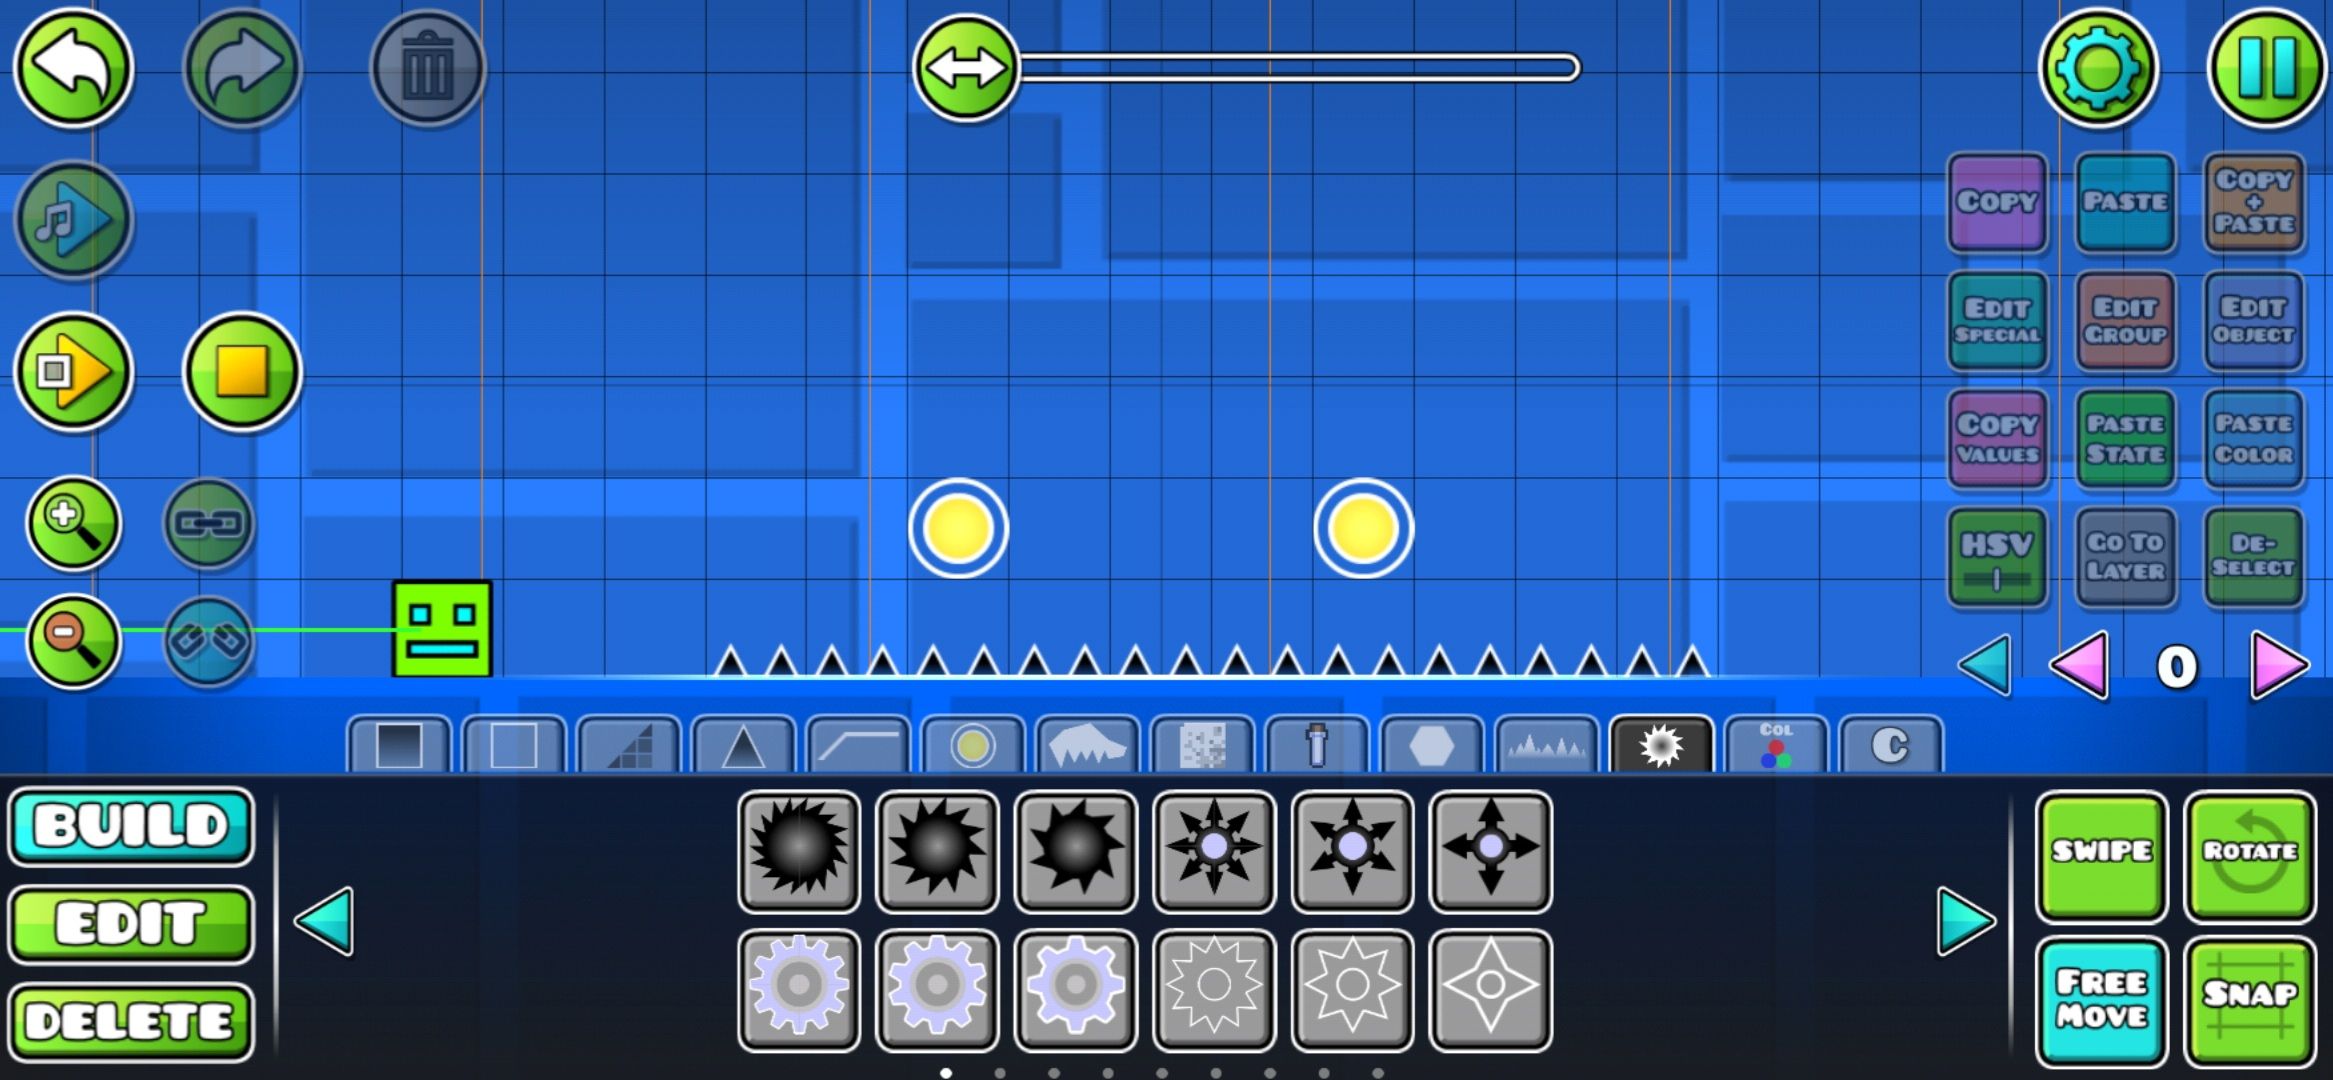 building objects in level editor in Geometry Dash.